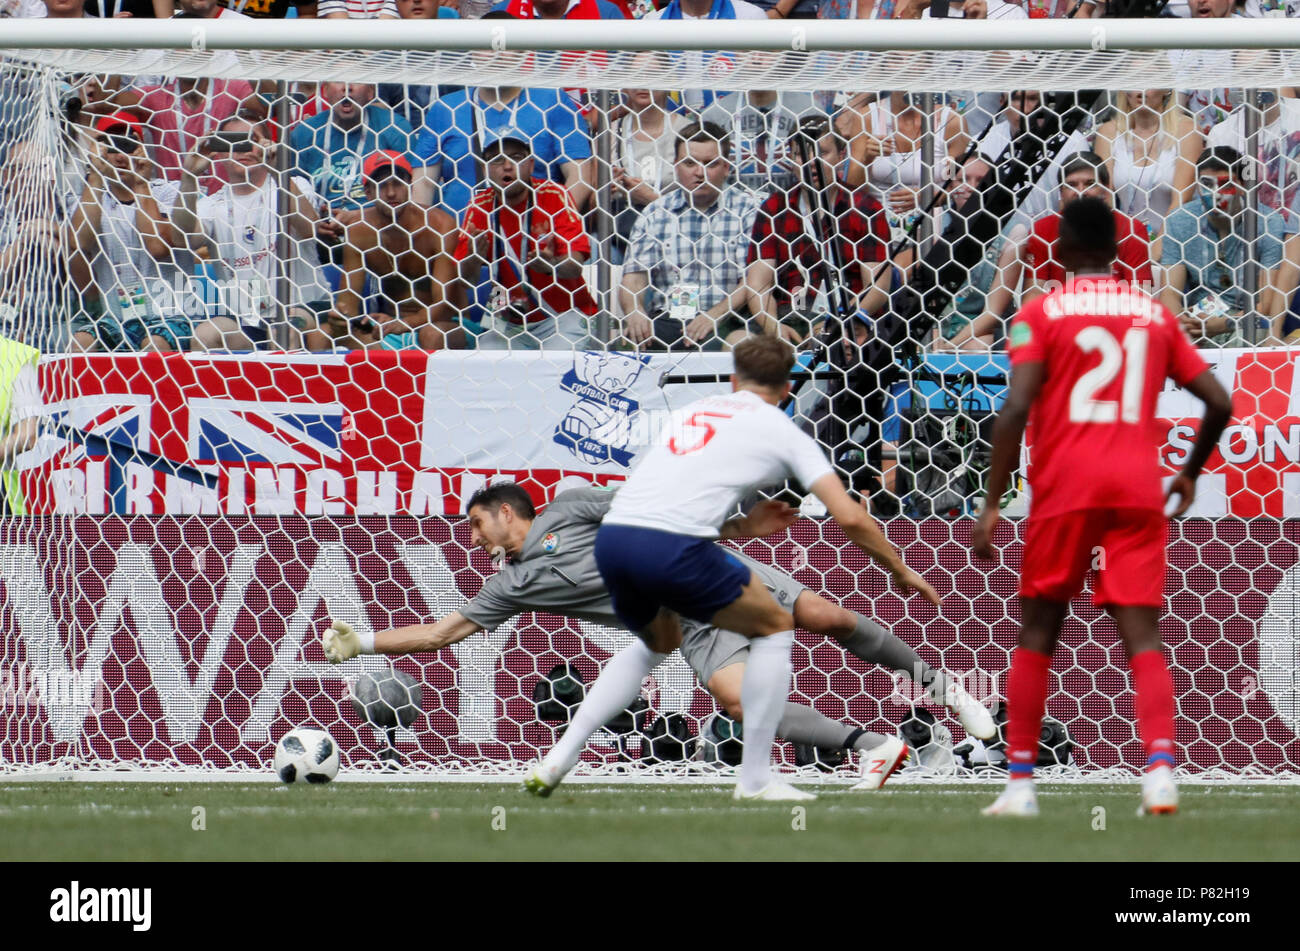 NIZHNY NOVGOROD, RUSSIA - JUNE 24: John Stones (N5) of England national team scores a goal past Jaime Penedo (C) of Panama national team during the 2018 FIFA World Cup Russia group G match between England and Panama at Nizhny Novgorod Stadium on June 24, 2018 in Nizhny Novgorod, Russia. (MB Media) Stock Photo